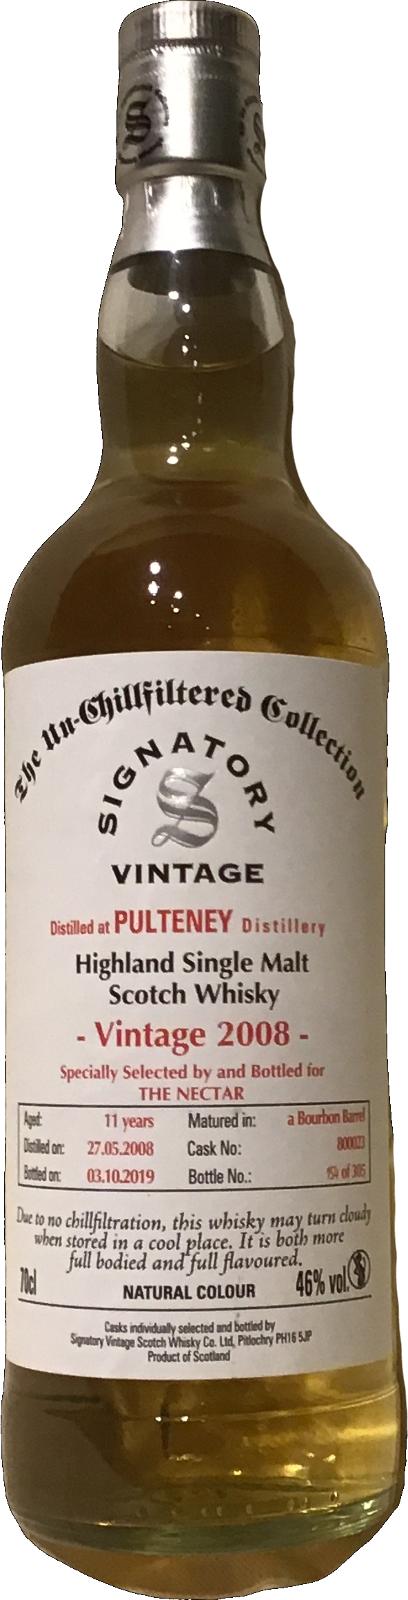 Old Pulteney 2008 SV The Un-Chillfiltered Collection Bourbon Barrel #800023 46% 700ml